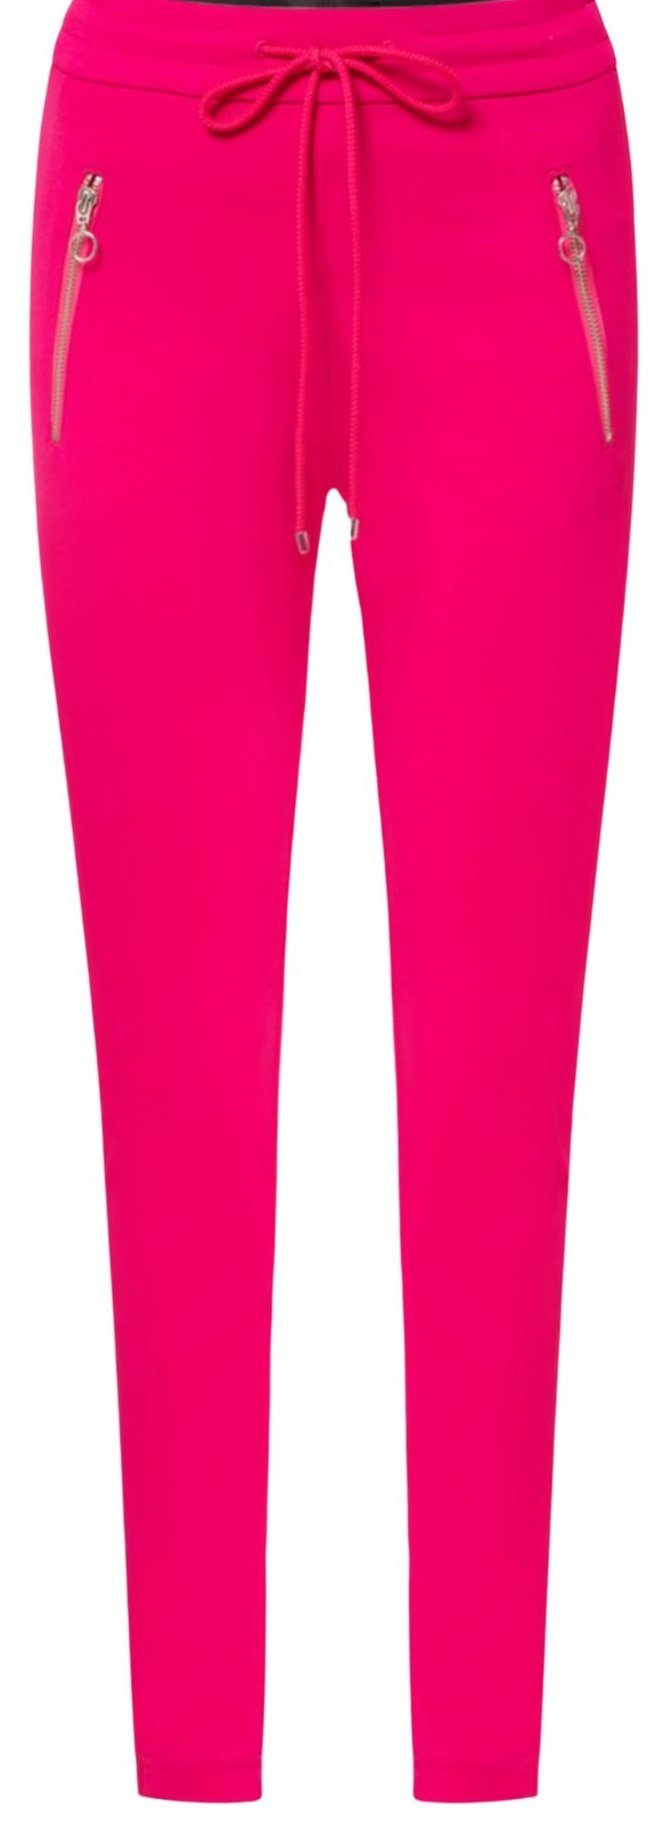 MAC Jogger Pants Easy Active Relaxed Fit mit Tunnelzug aus leichtem Techno Stretch virtual pink | Stretchhosen